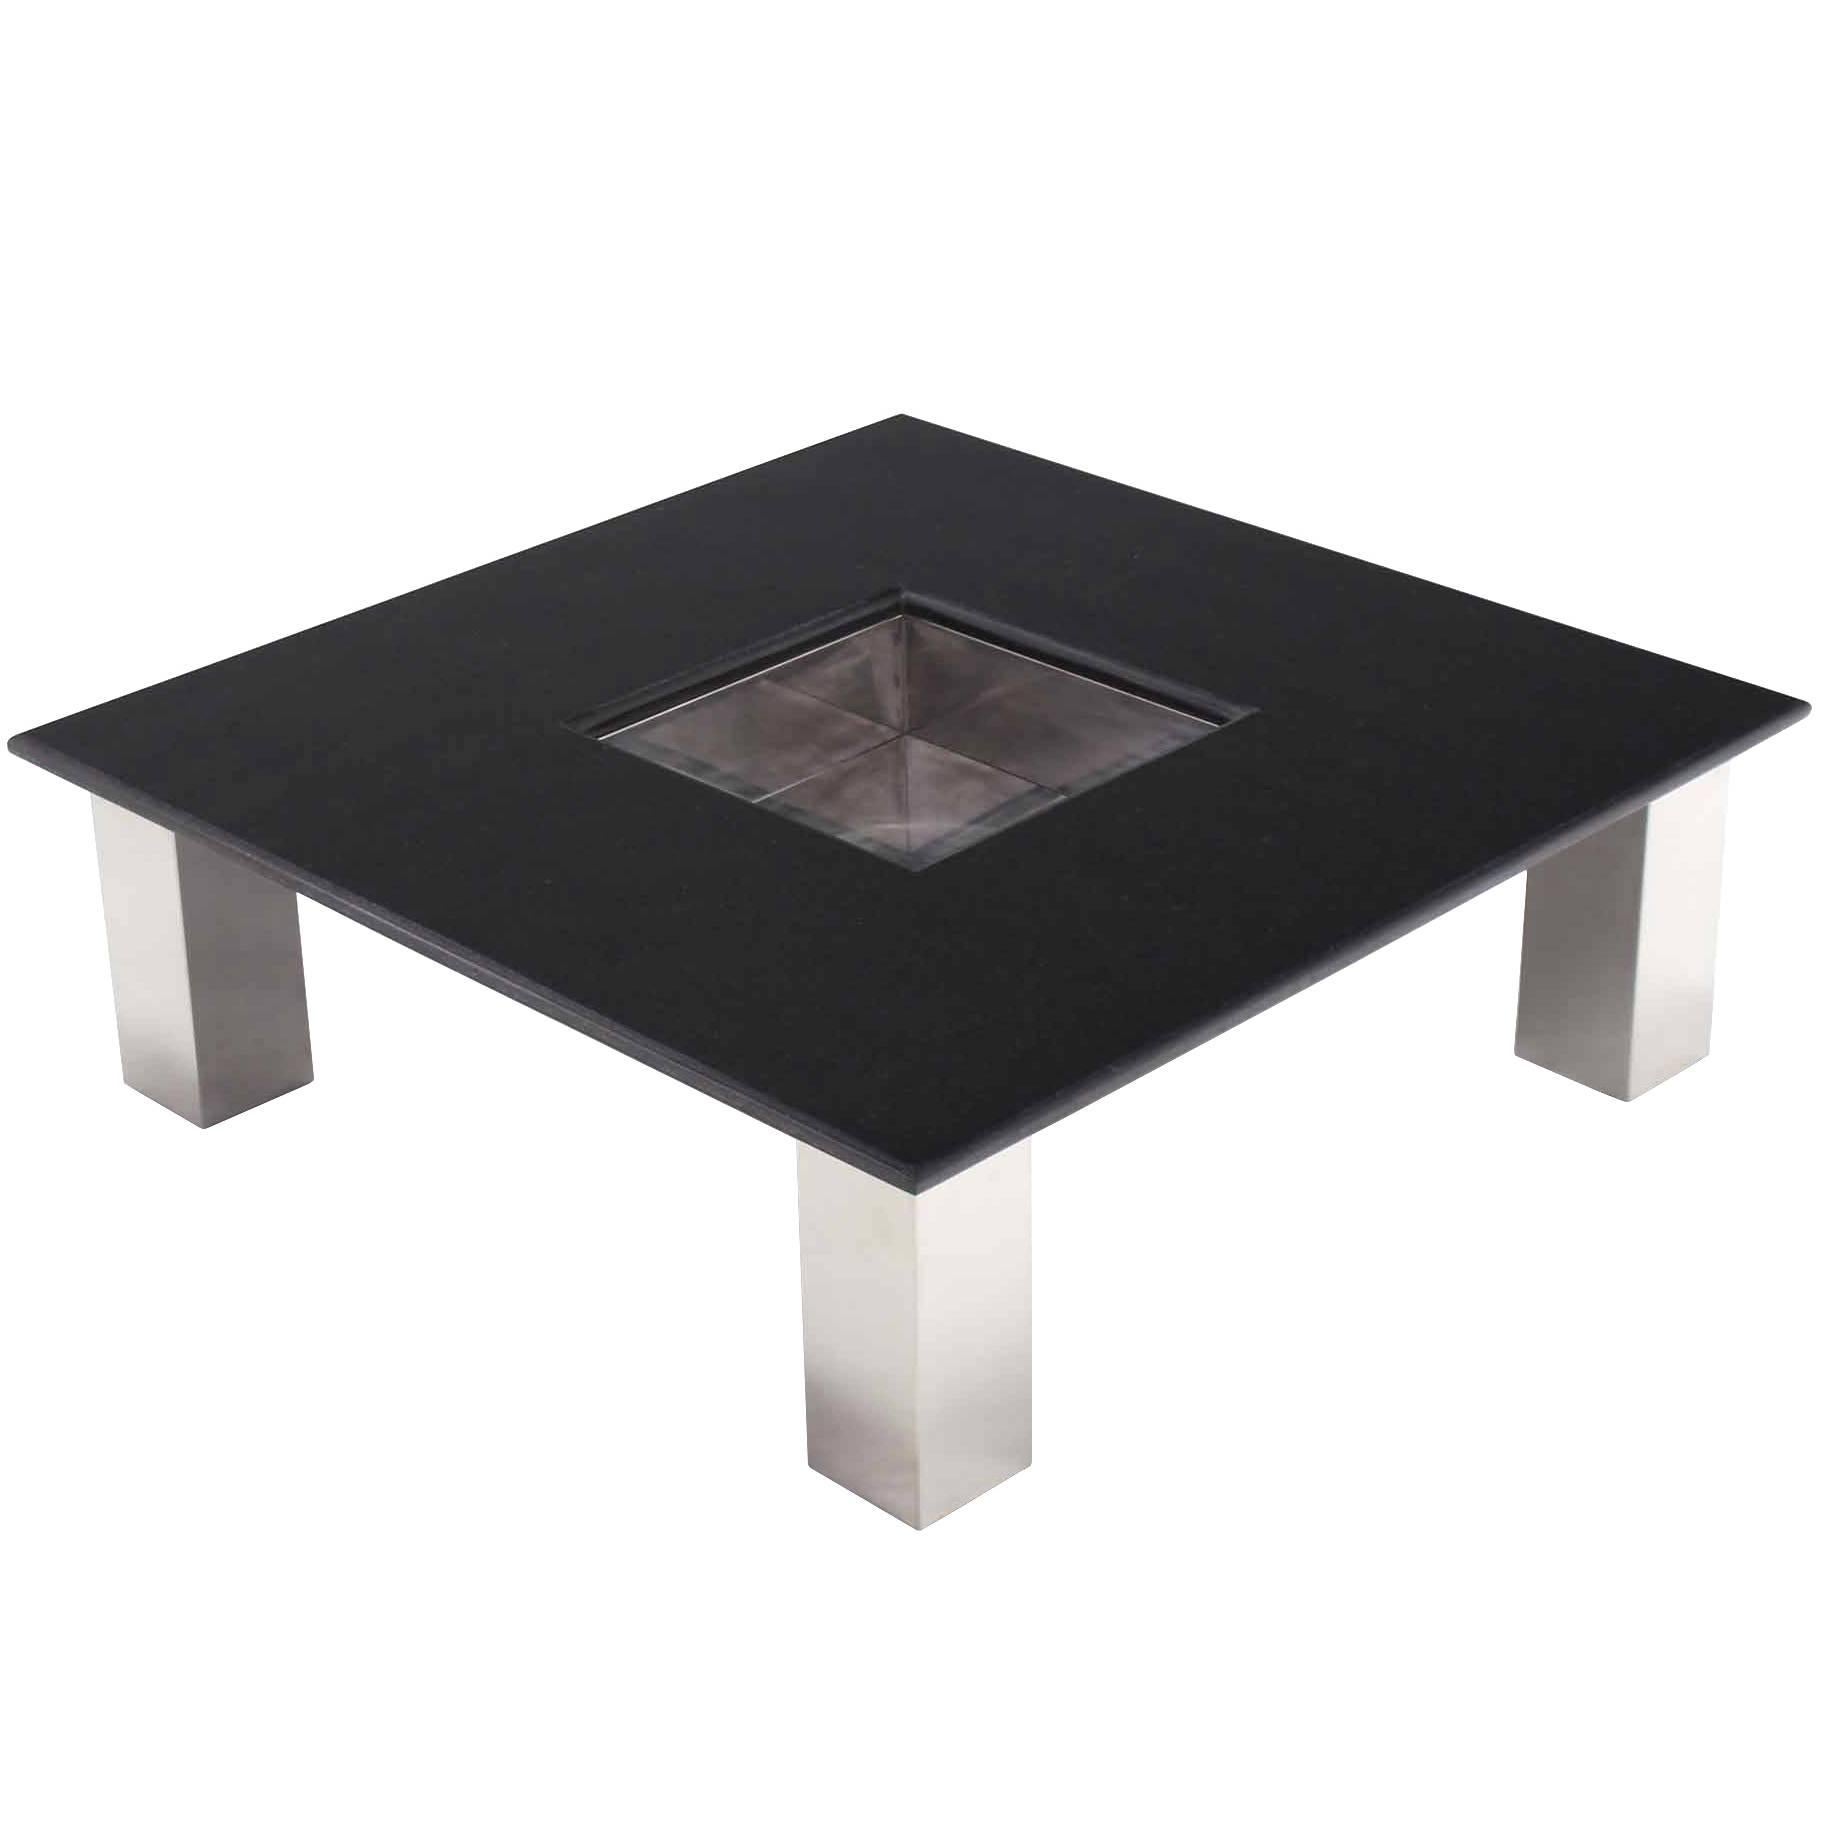 Large Square Black Granite Top Coffee Table with Center Planter Chrome Base For Sale